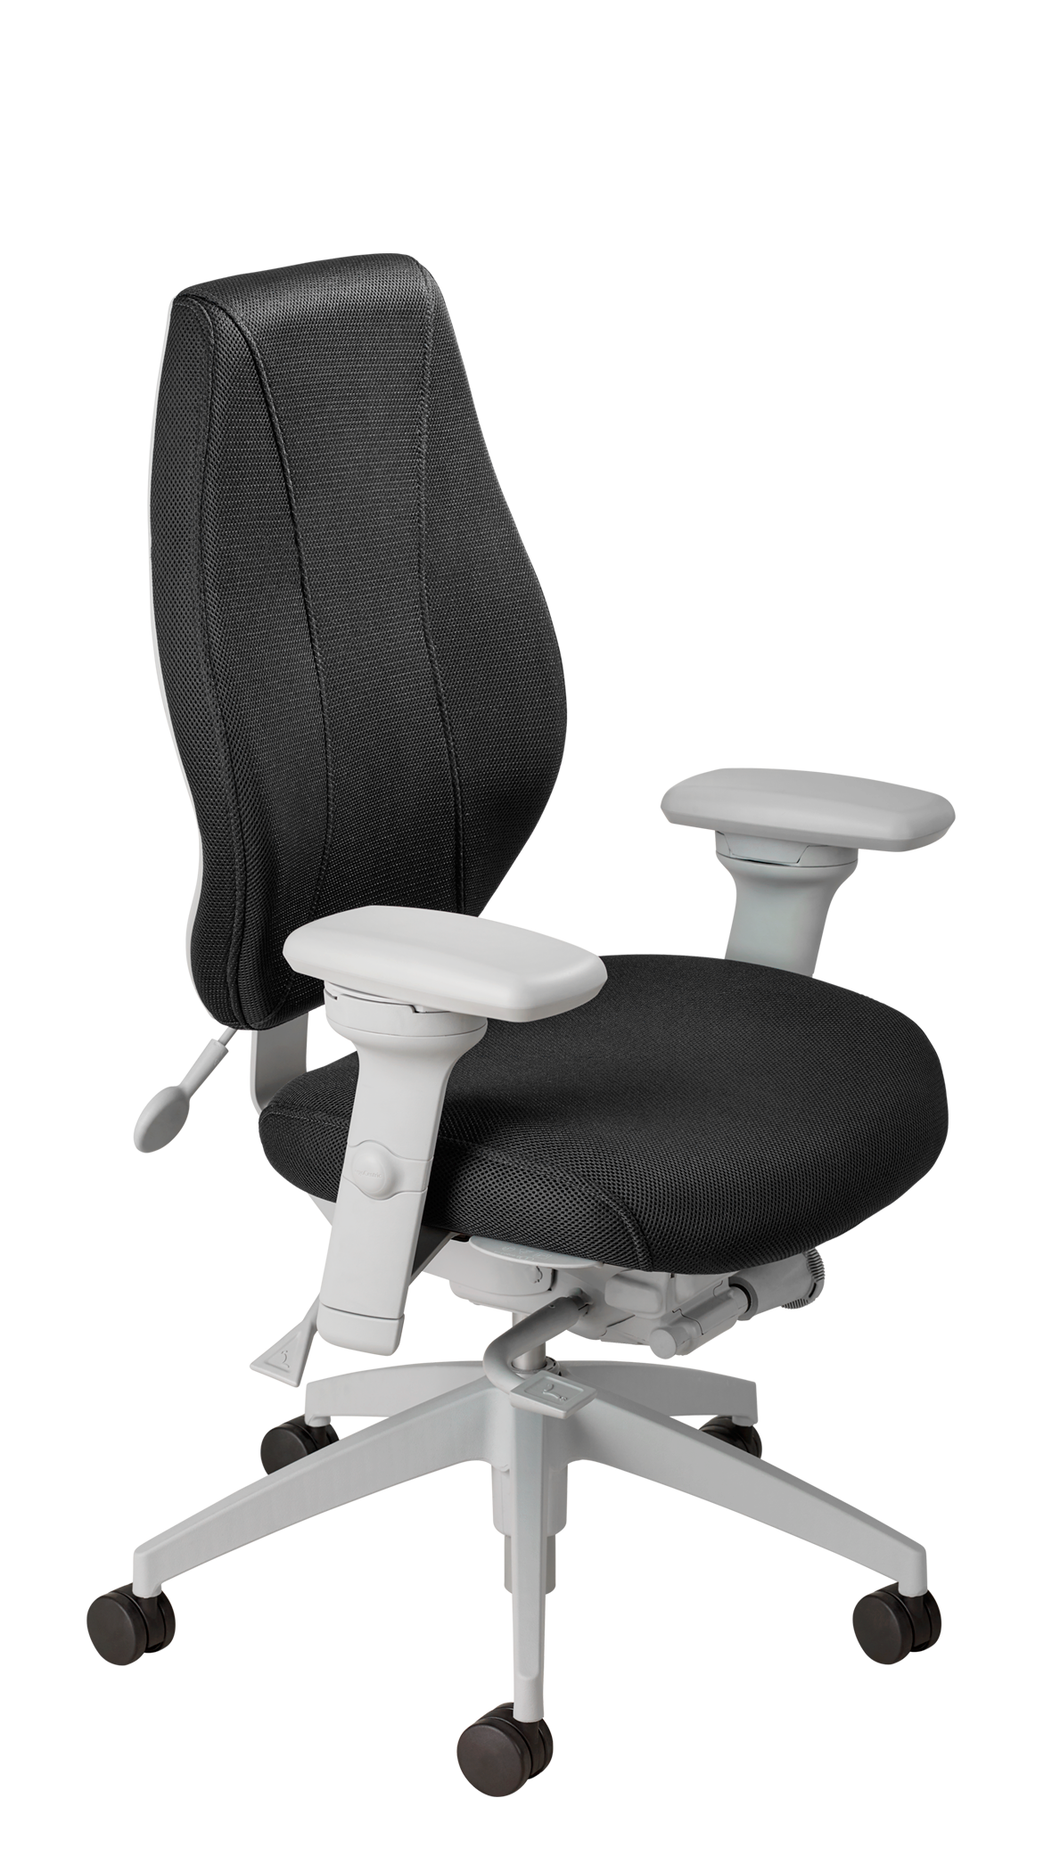 airCentric 2 with Synchro Glide Mechanism, Light Grey Frame, AirKnit Black Upholstery